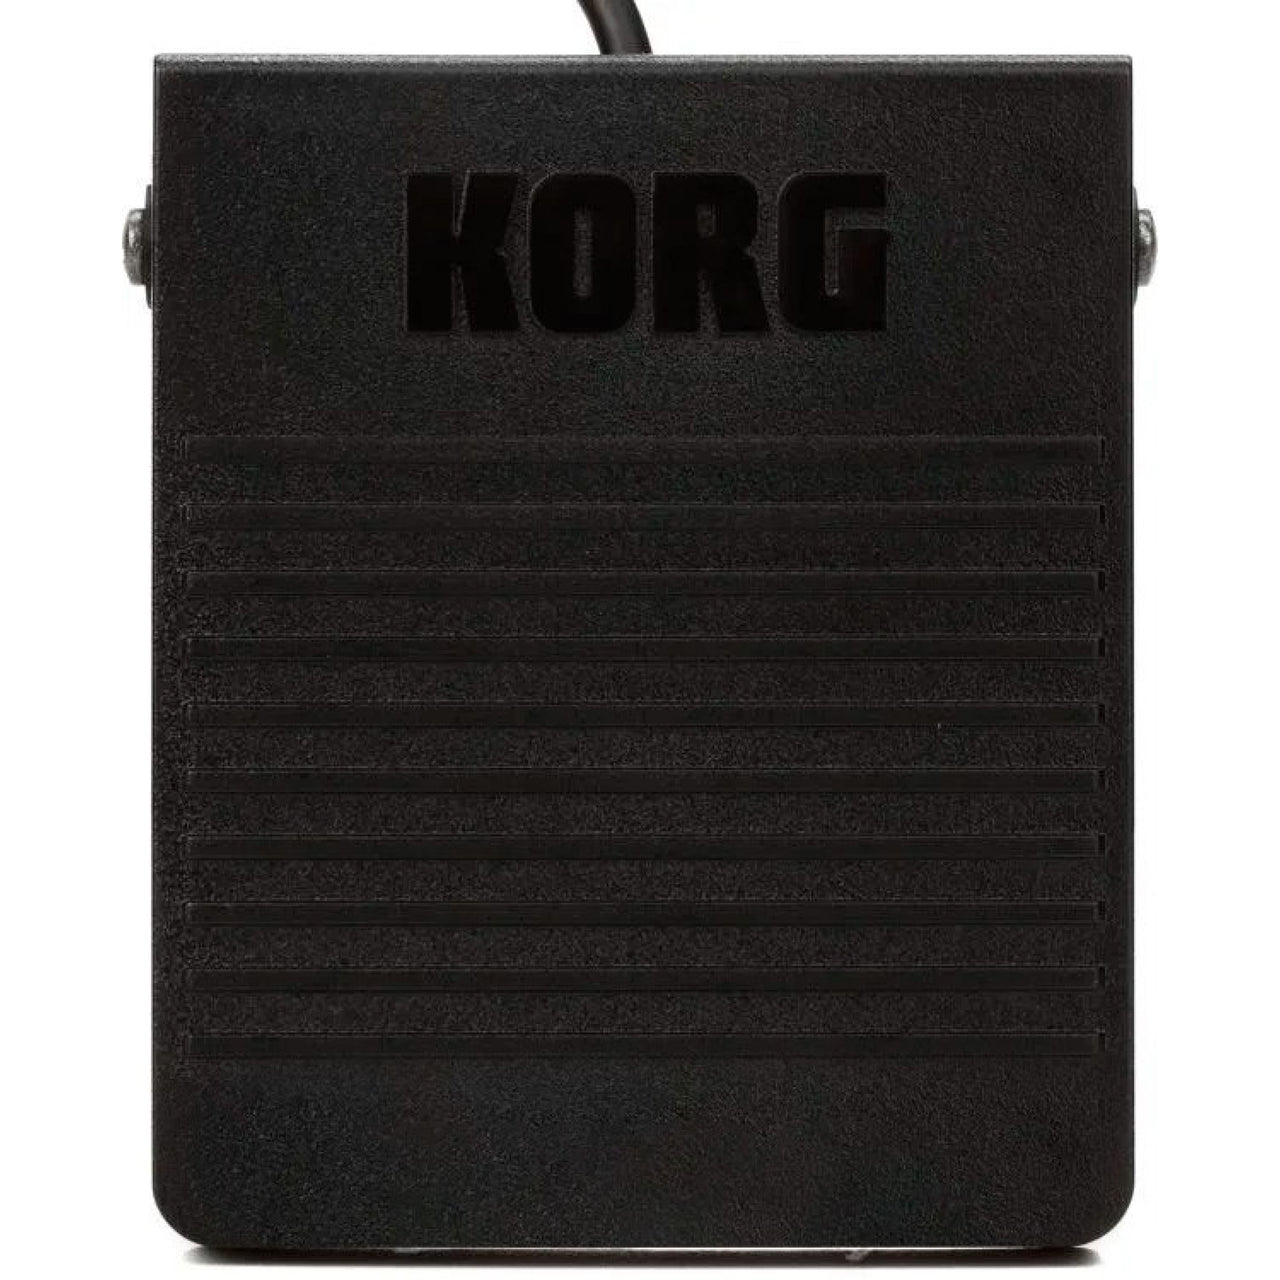 Pedal  Korg Switch, Ps-3